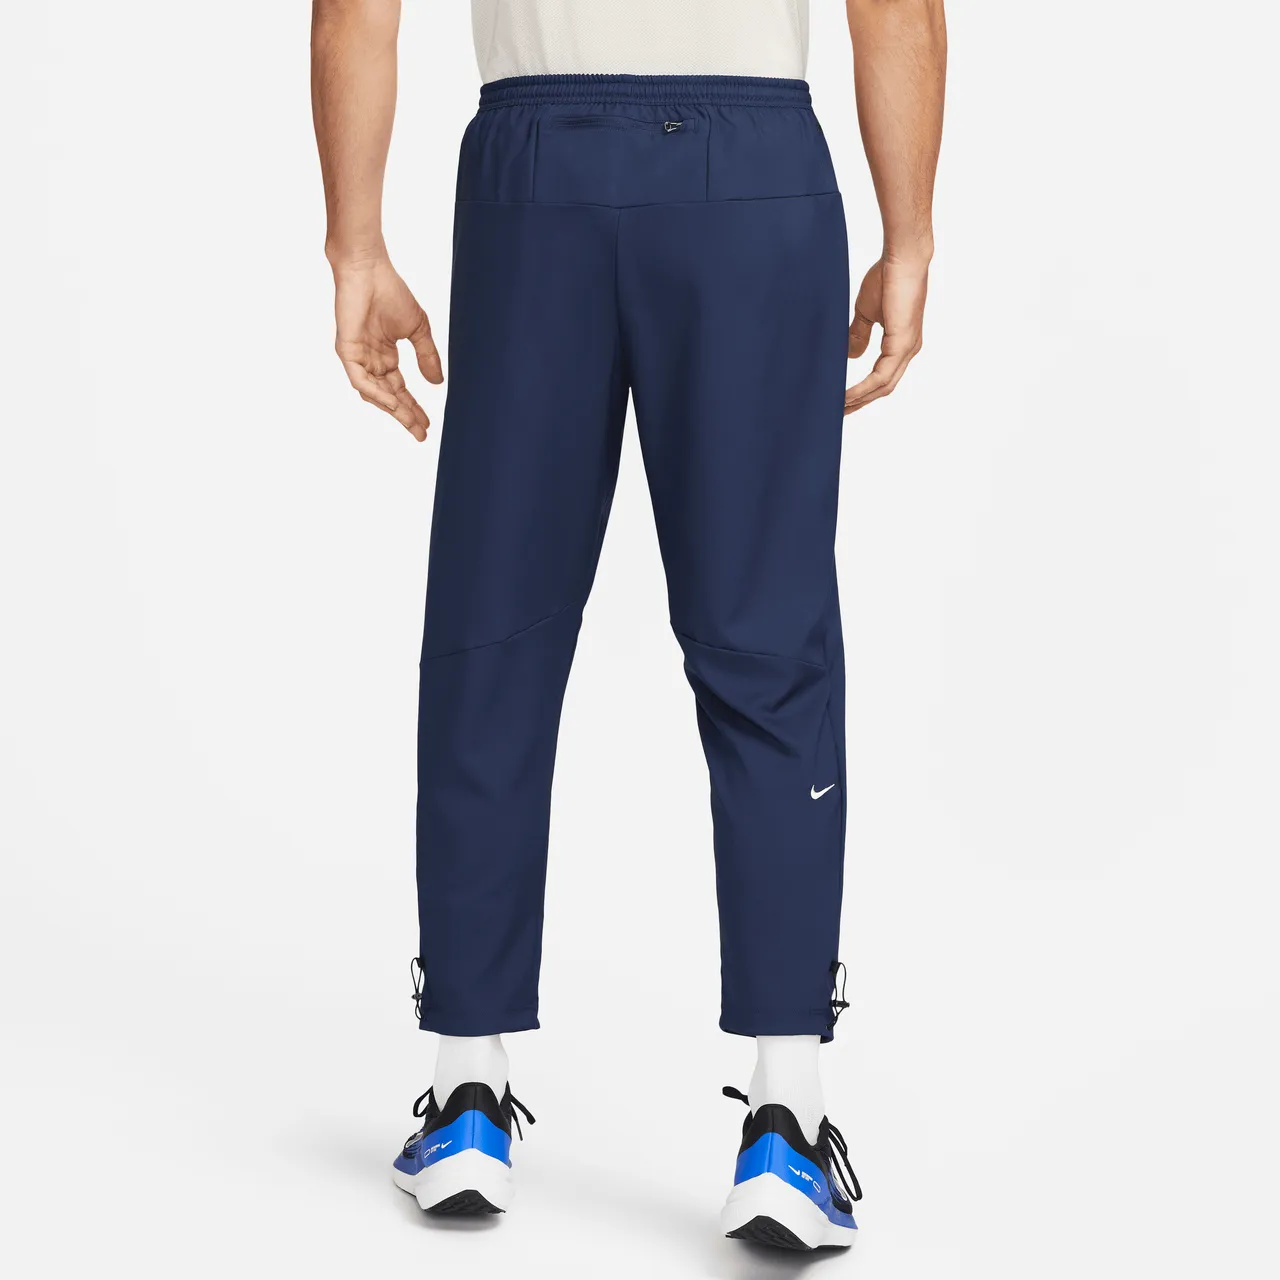 Nike Challenger Track Club Men's Dri-FIT Running Trousers - Blue - Polyester